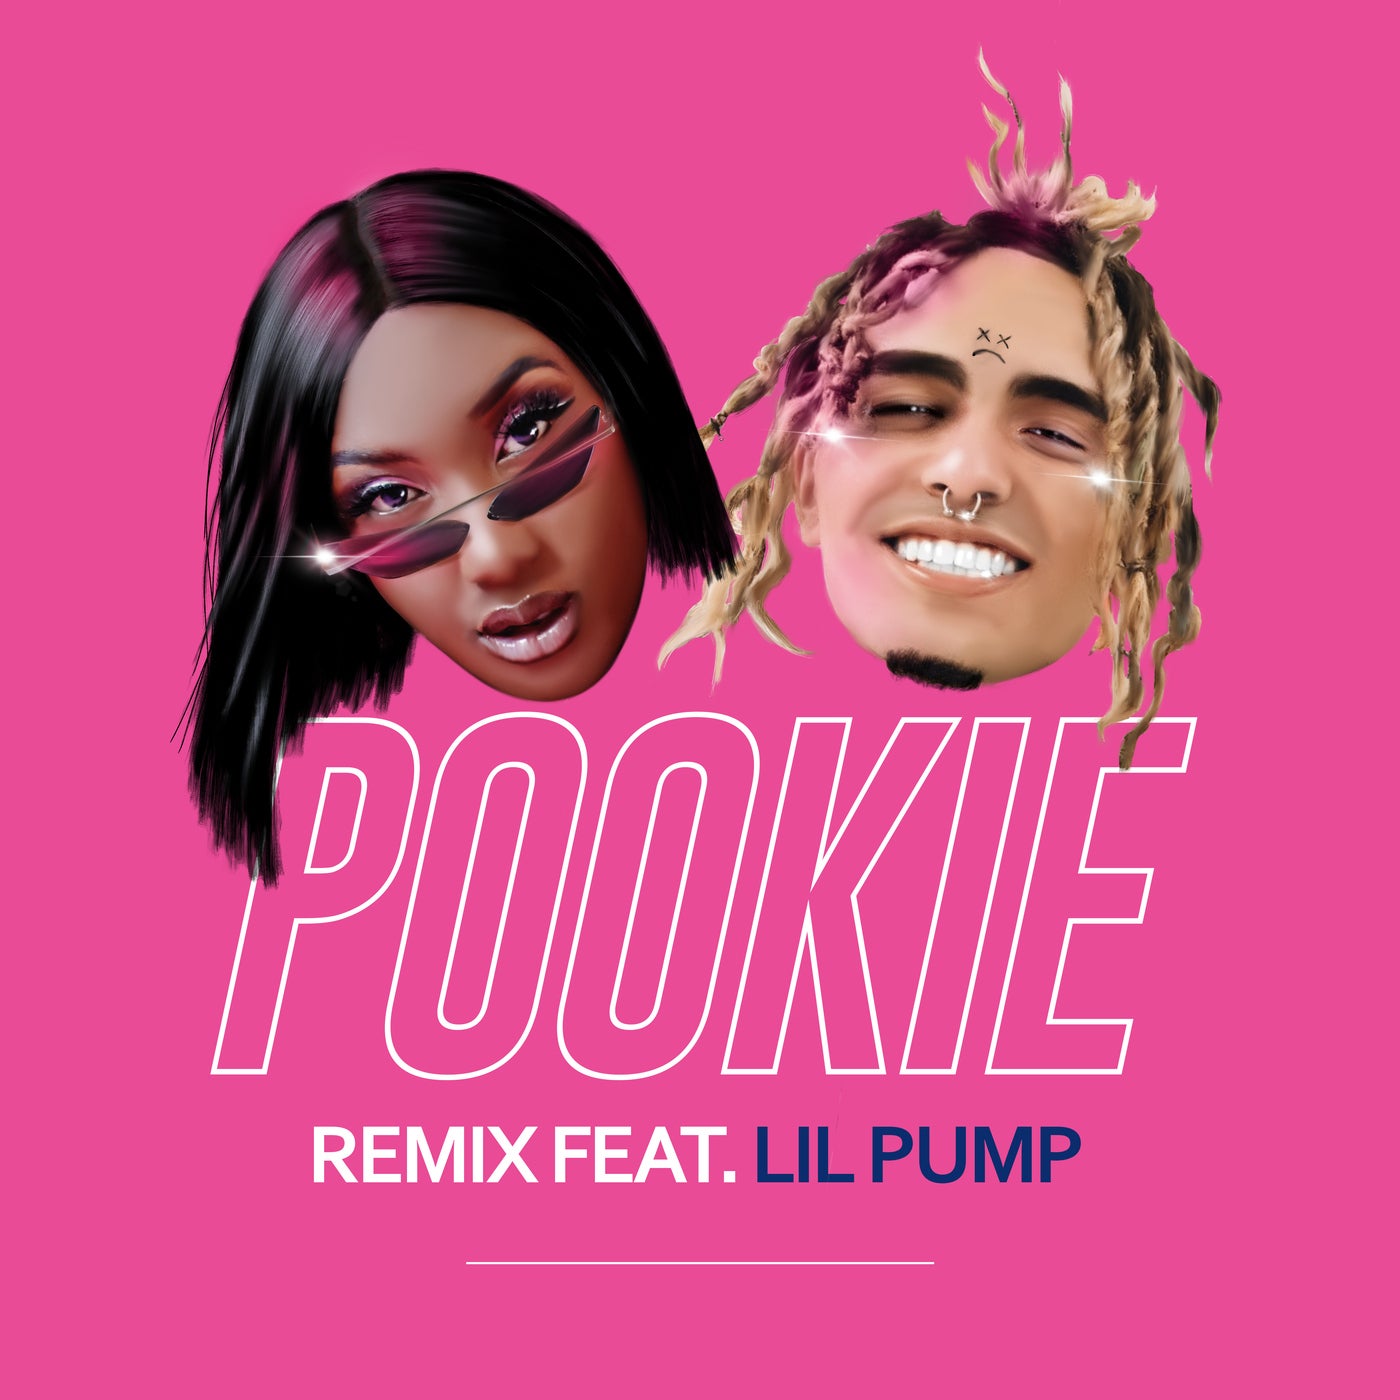 Tegne forsikring husmor ensom Pookie (feat. Lil Pump) by Lil Pump and Aya Nakamura on Beatsource